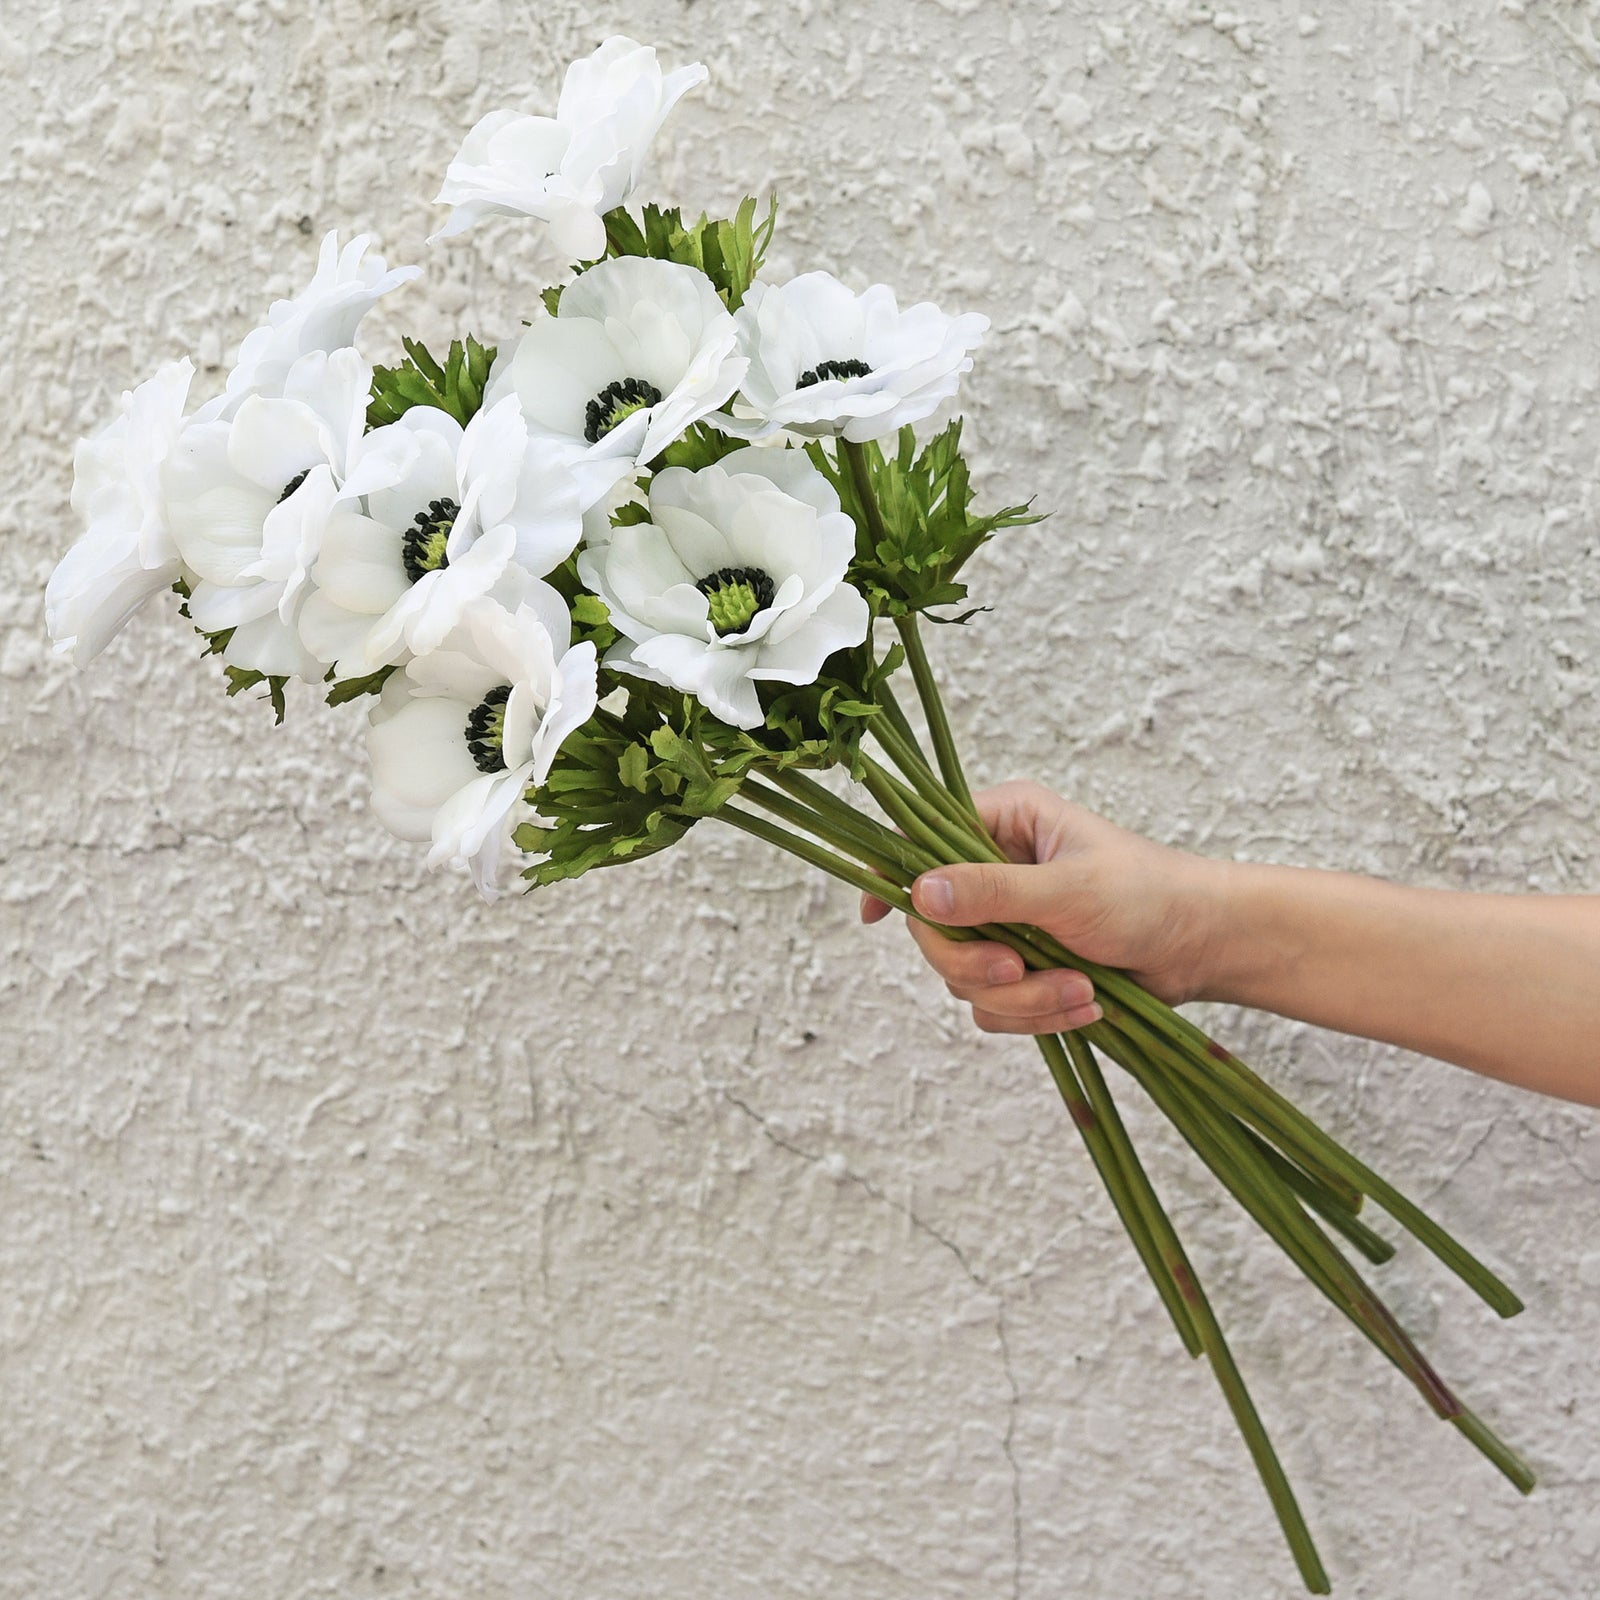 9 Long Stems of ‘Real Touch’ (White) Artificial Anemone Silk Flowers with Leaves 48cm (18.9 inches)